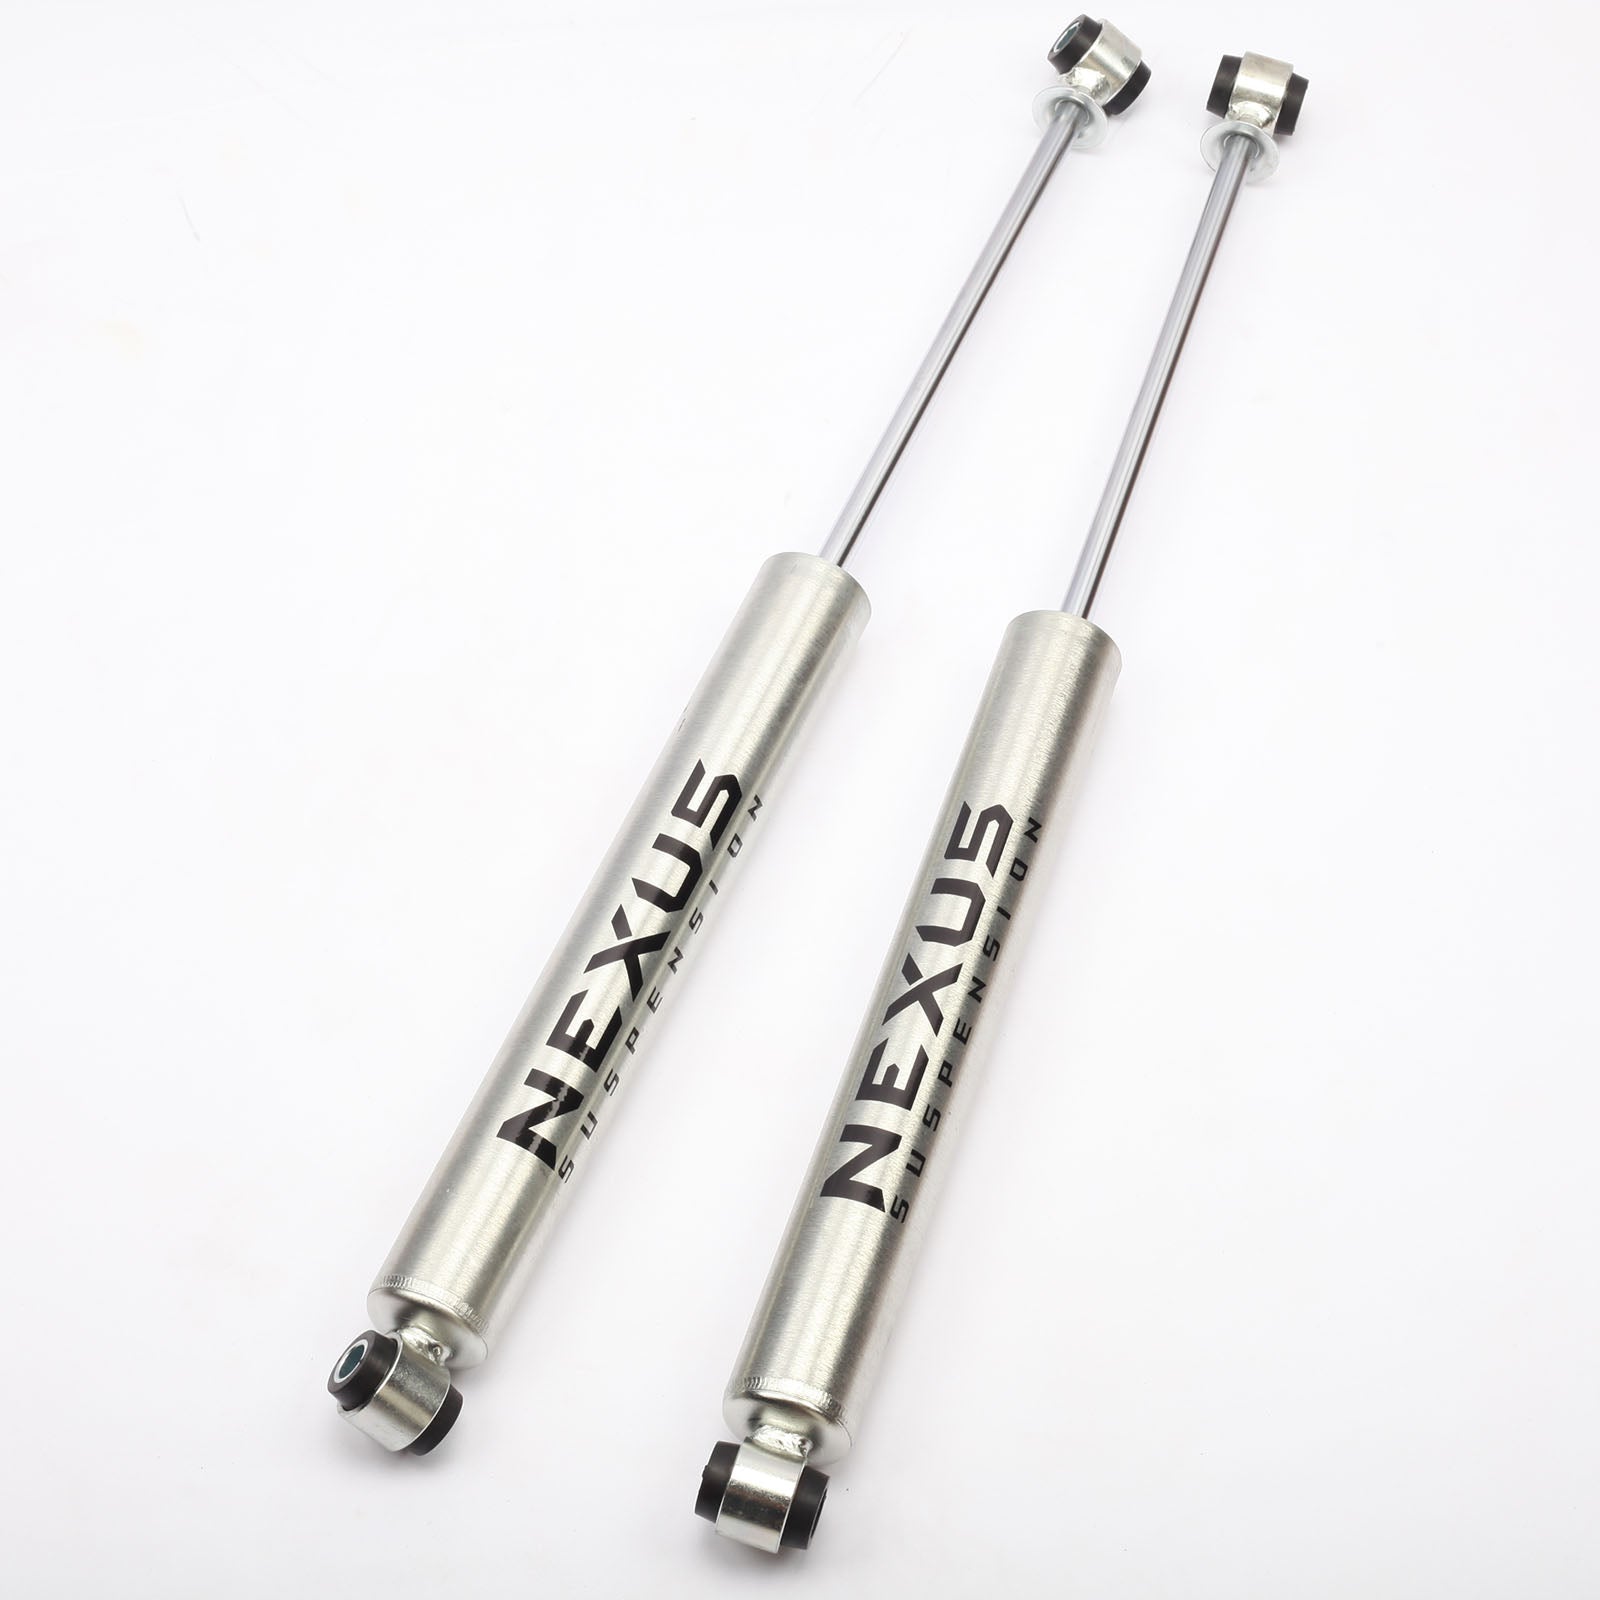 NEXUS SUSPENSION 6Inch Lift Rear Shock Absorber for 2000-2012 GMC Yukon 4WD,Zinc Plated Coating,Pair Pack